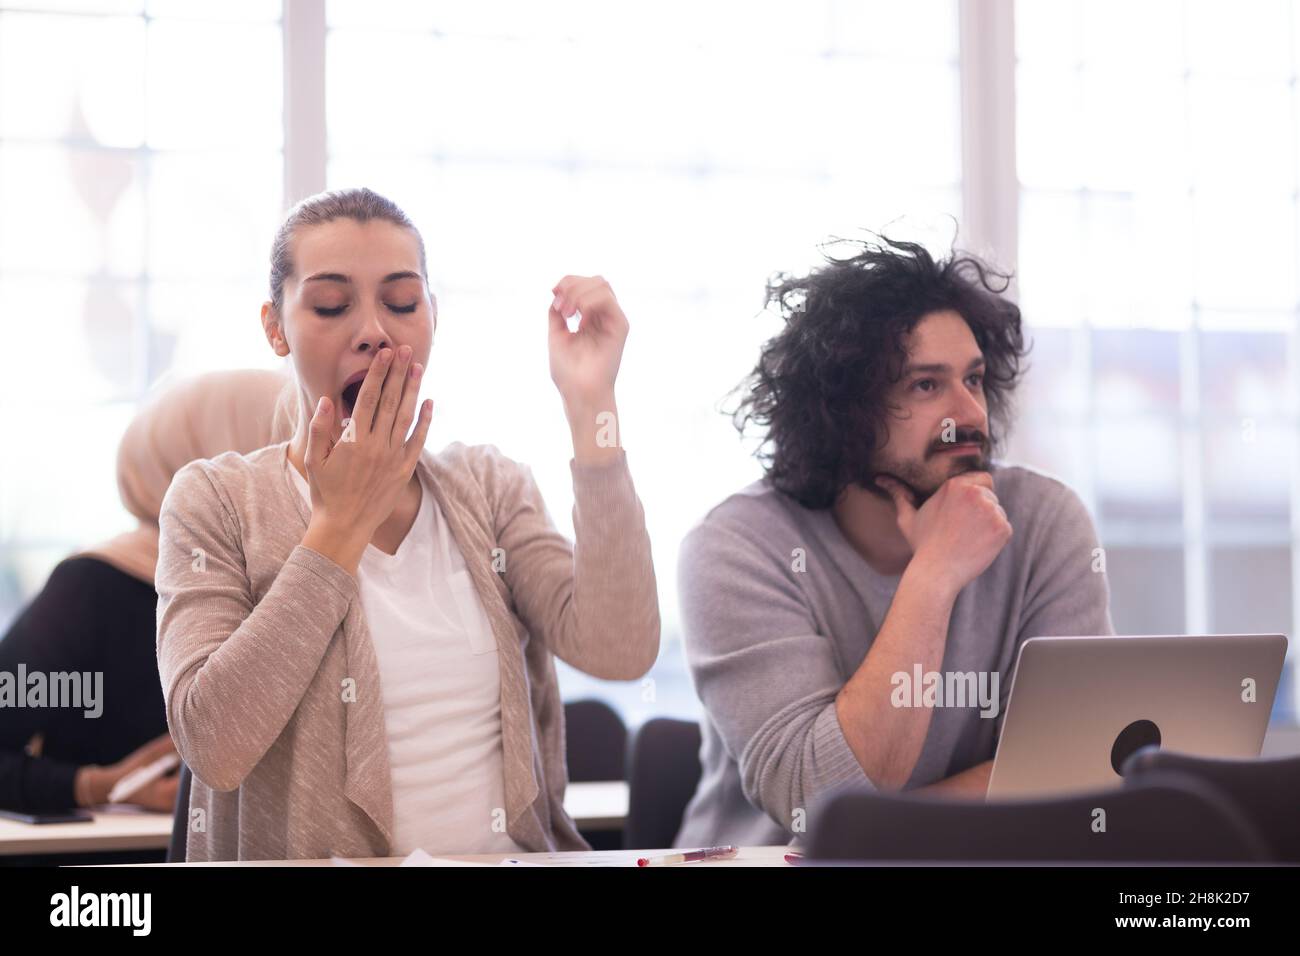 Students listening to a lecturer in a classroom. Smart young girl yawning during class. Stock Photo